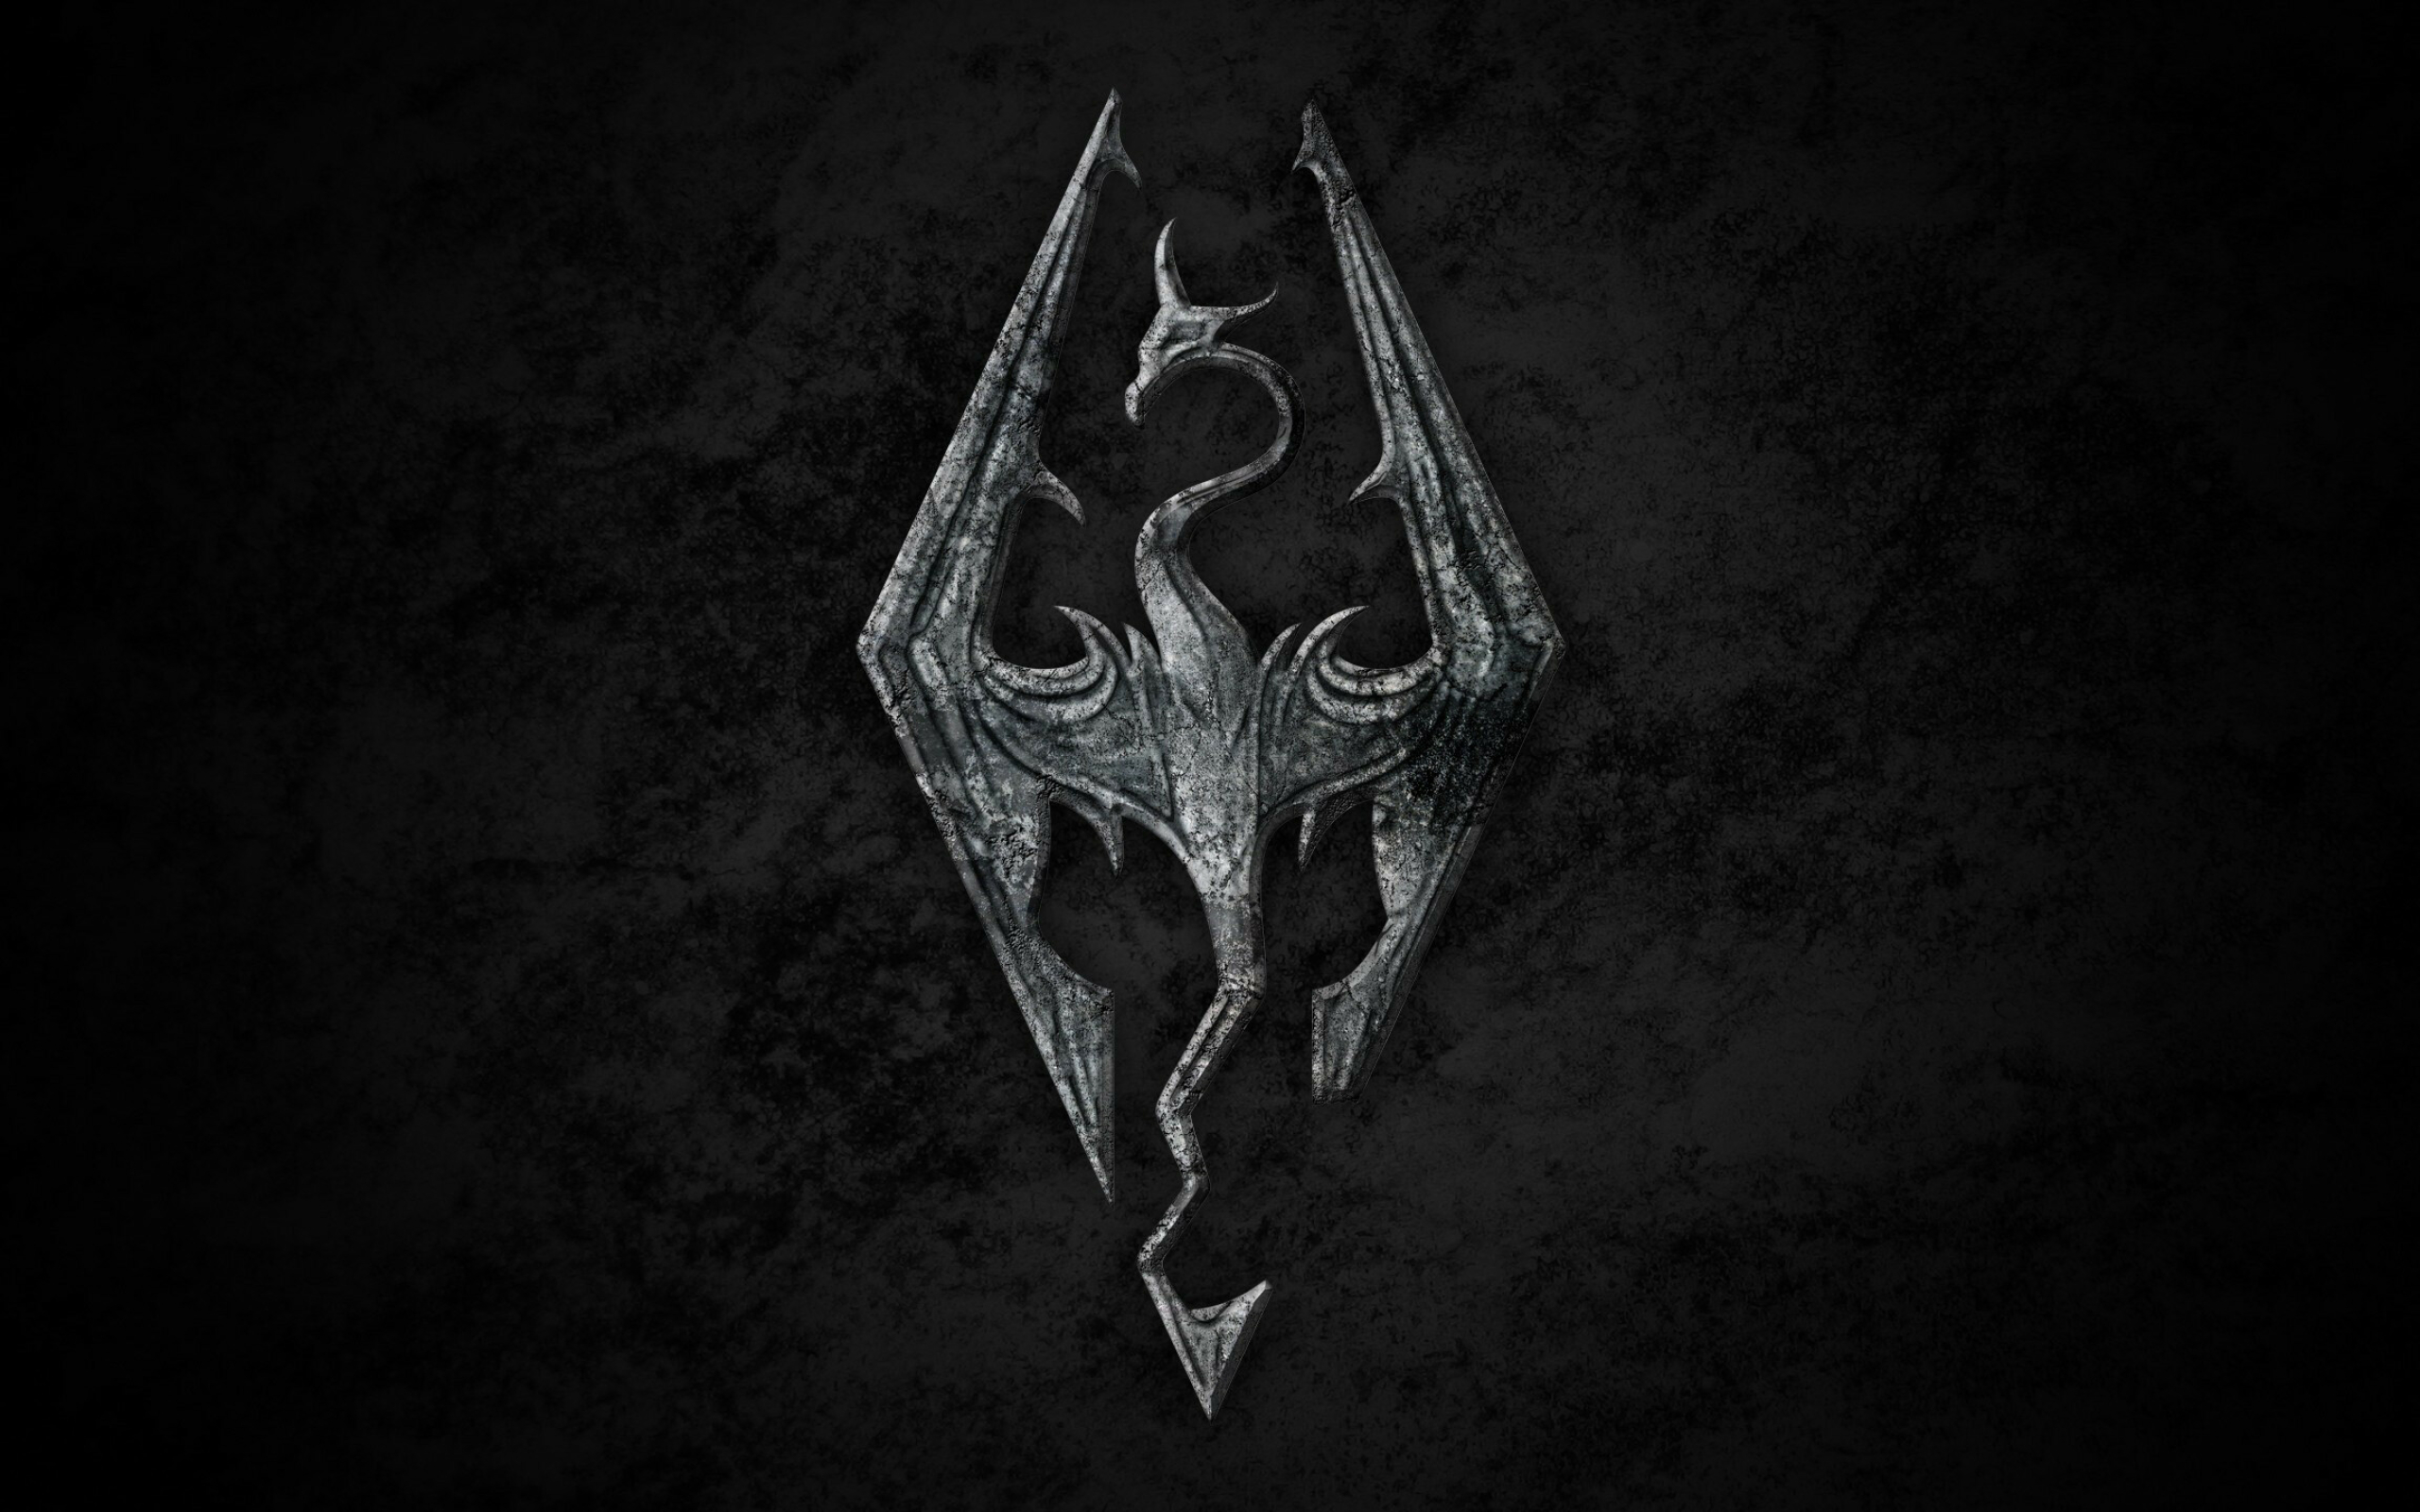 The Elder Scrolls: Skyrim, Winner of more than 200 Game of the Year awards. 2560x1600 HD Background.